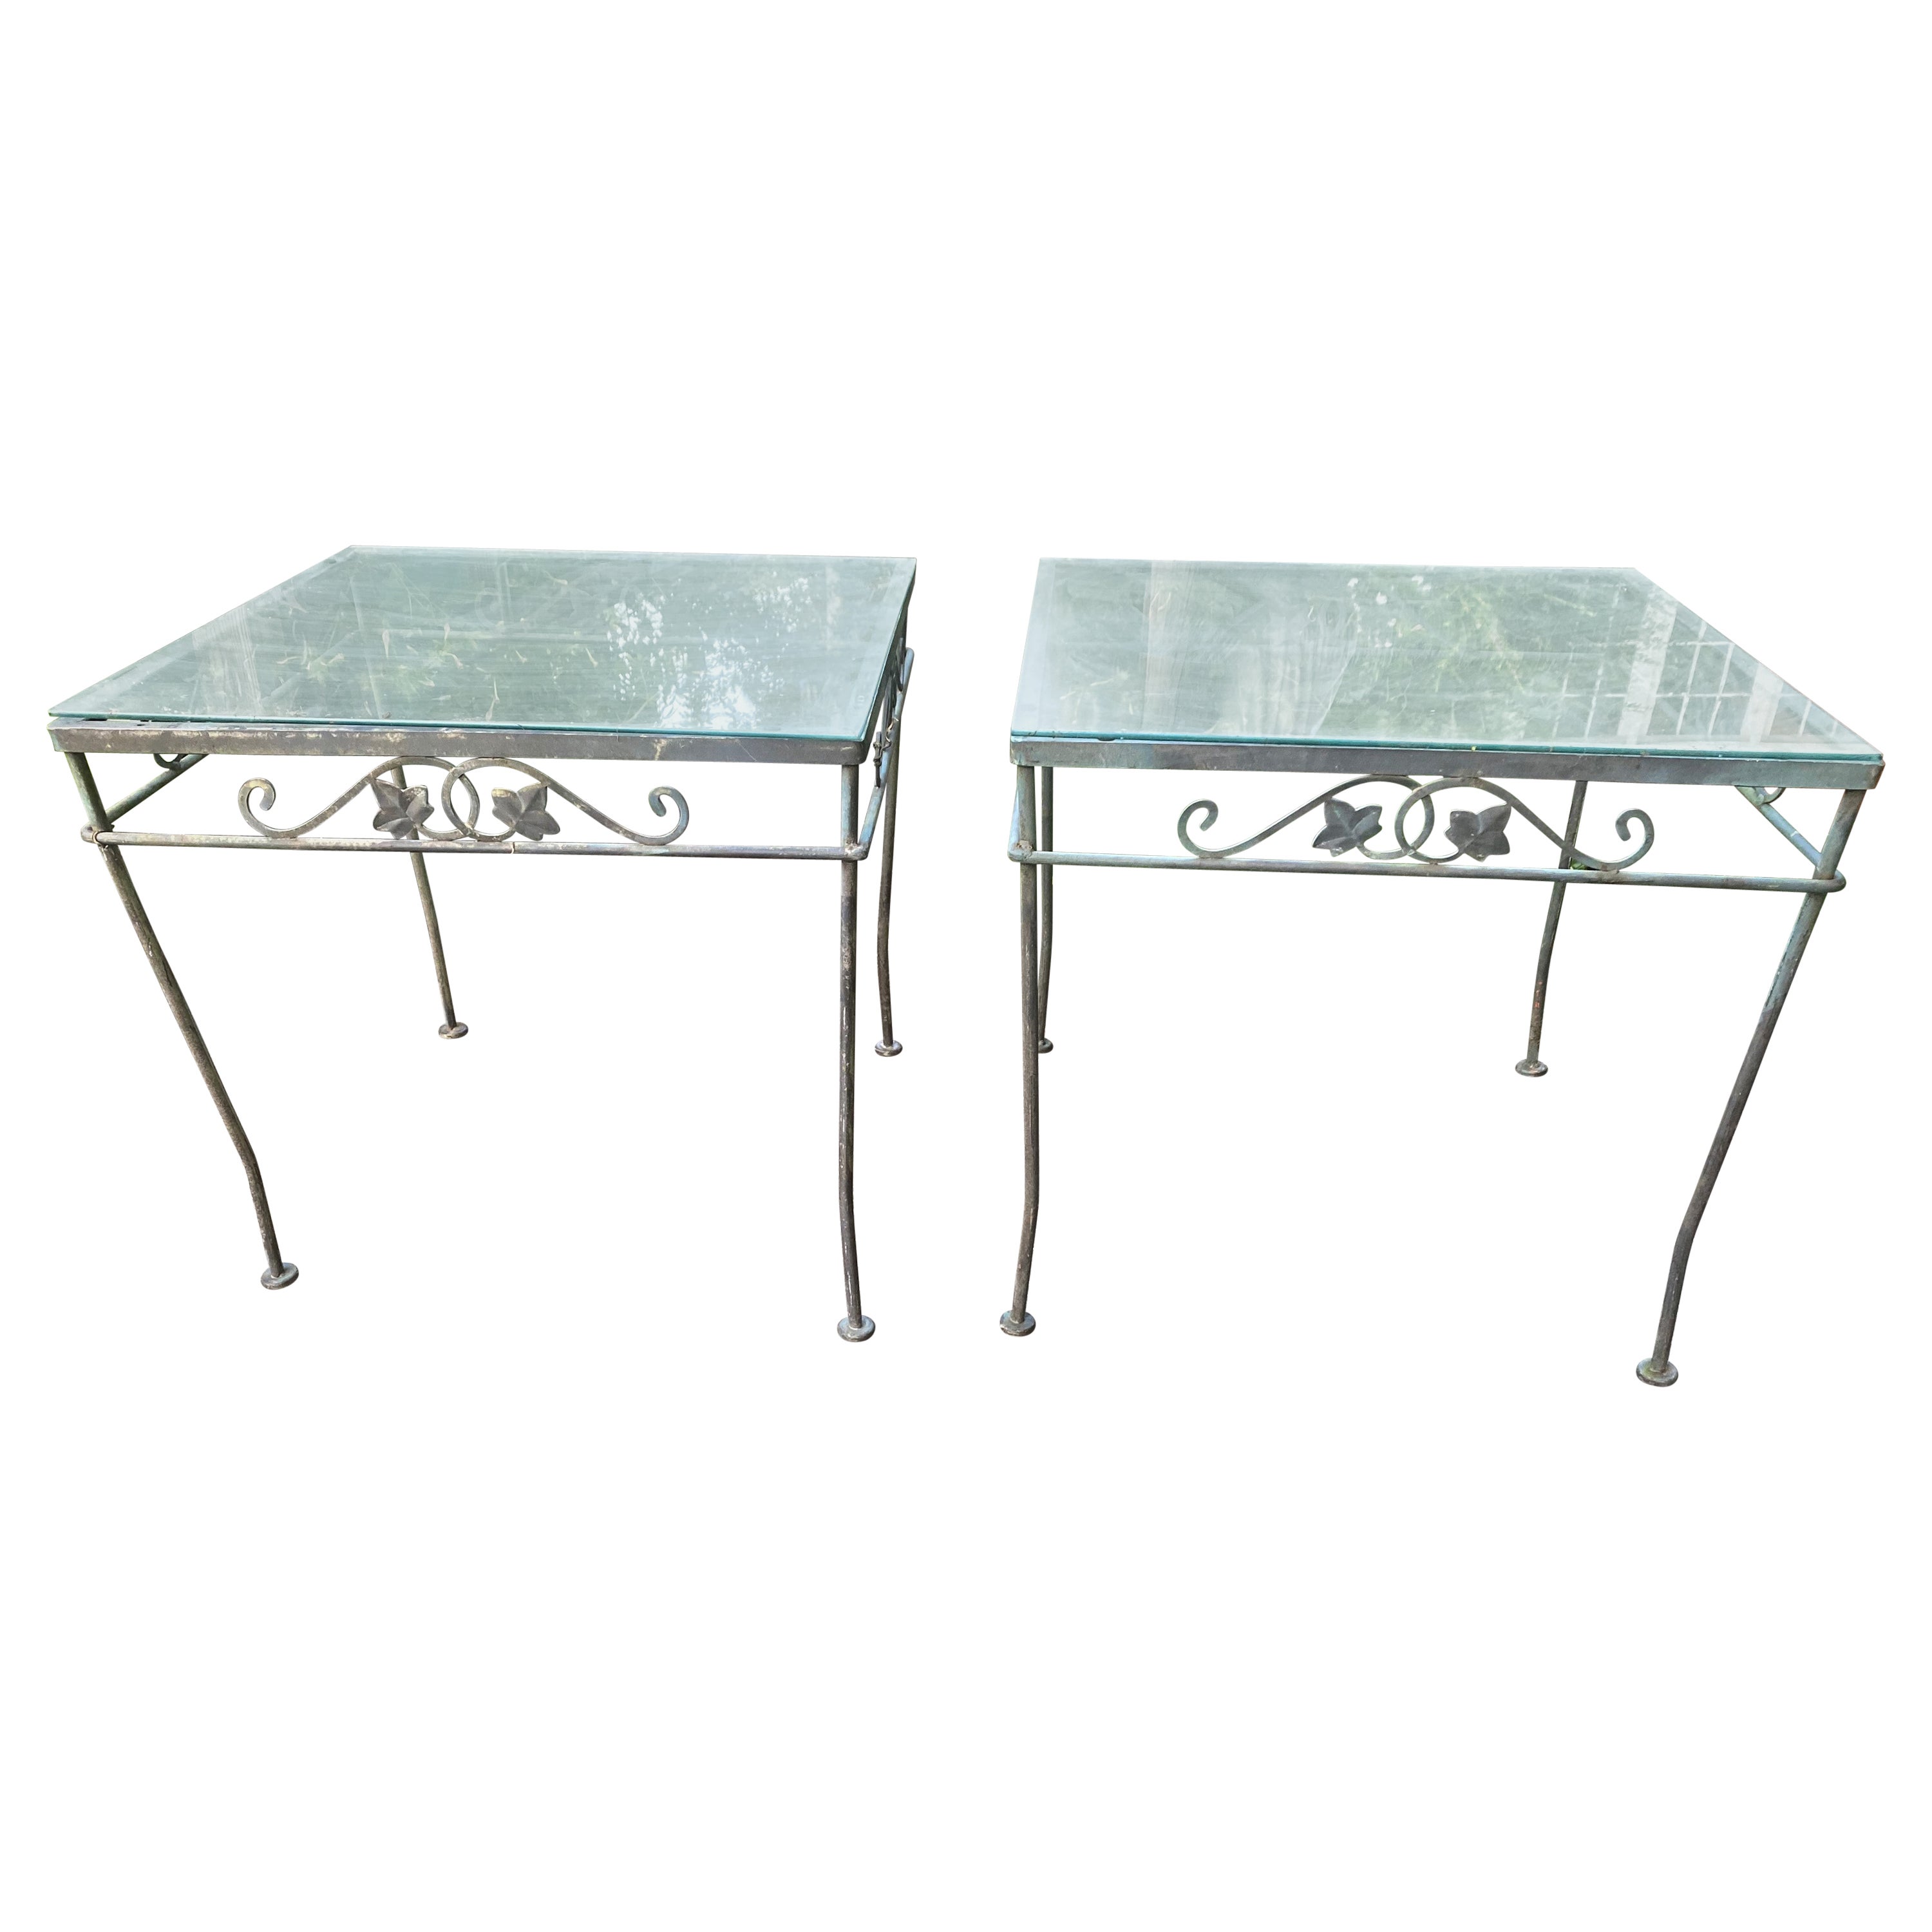 Vintage Wrought Salterini Style Iron Patio Side Tables with Glass Tops - a Pair